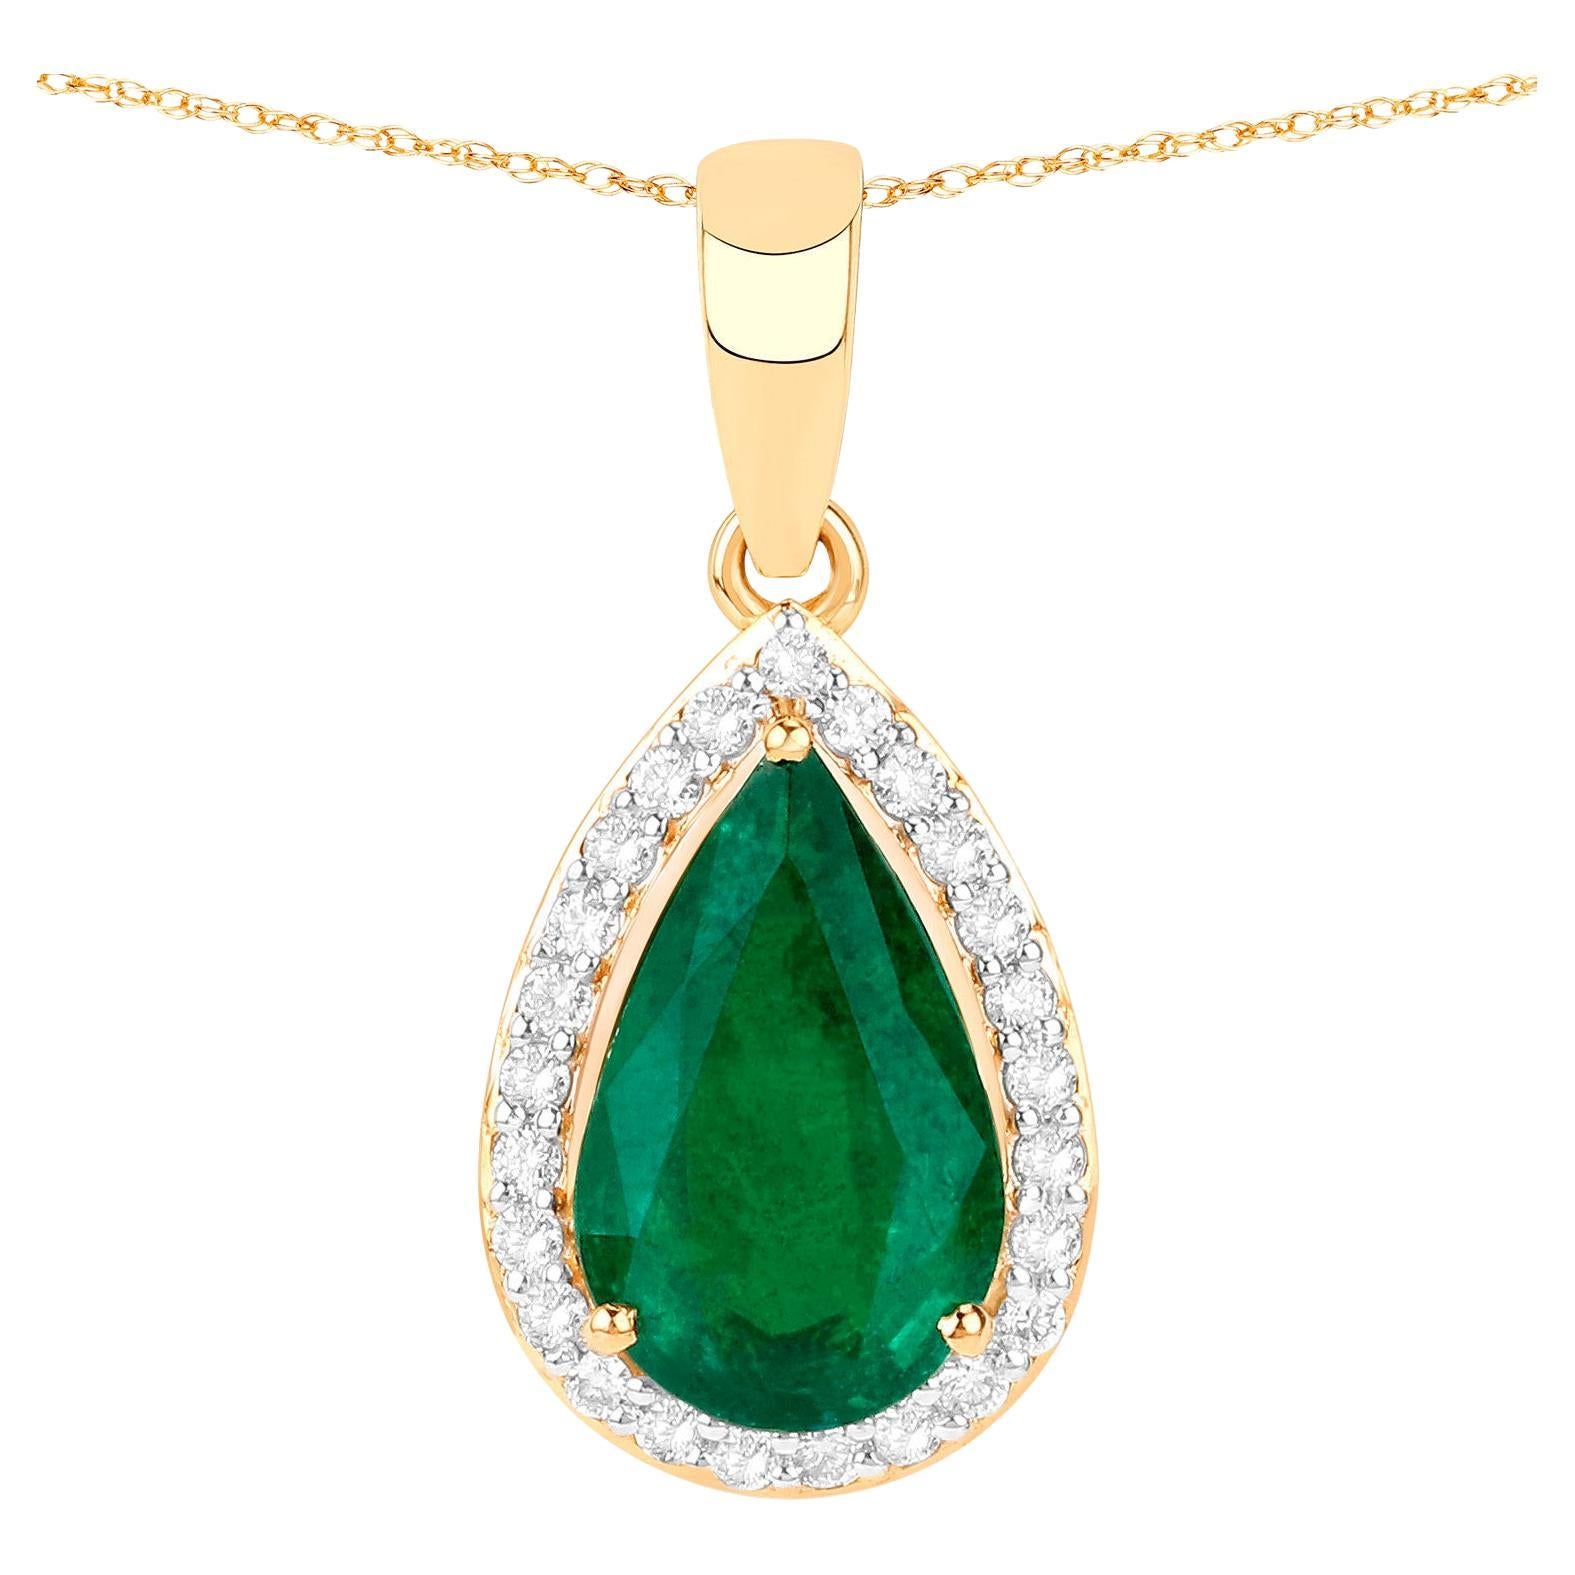 IGI Certified Zambian Emerald Necklace With Diamonds 1.76 Carats 14K Yellow Gold For Sale